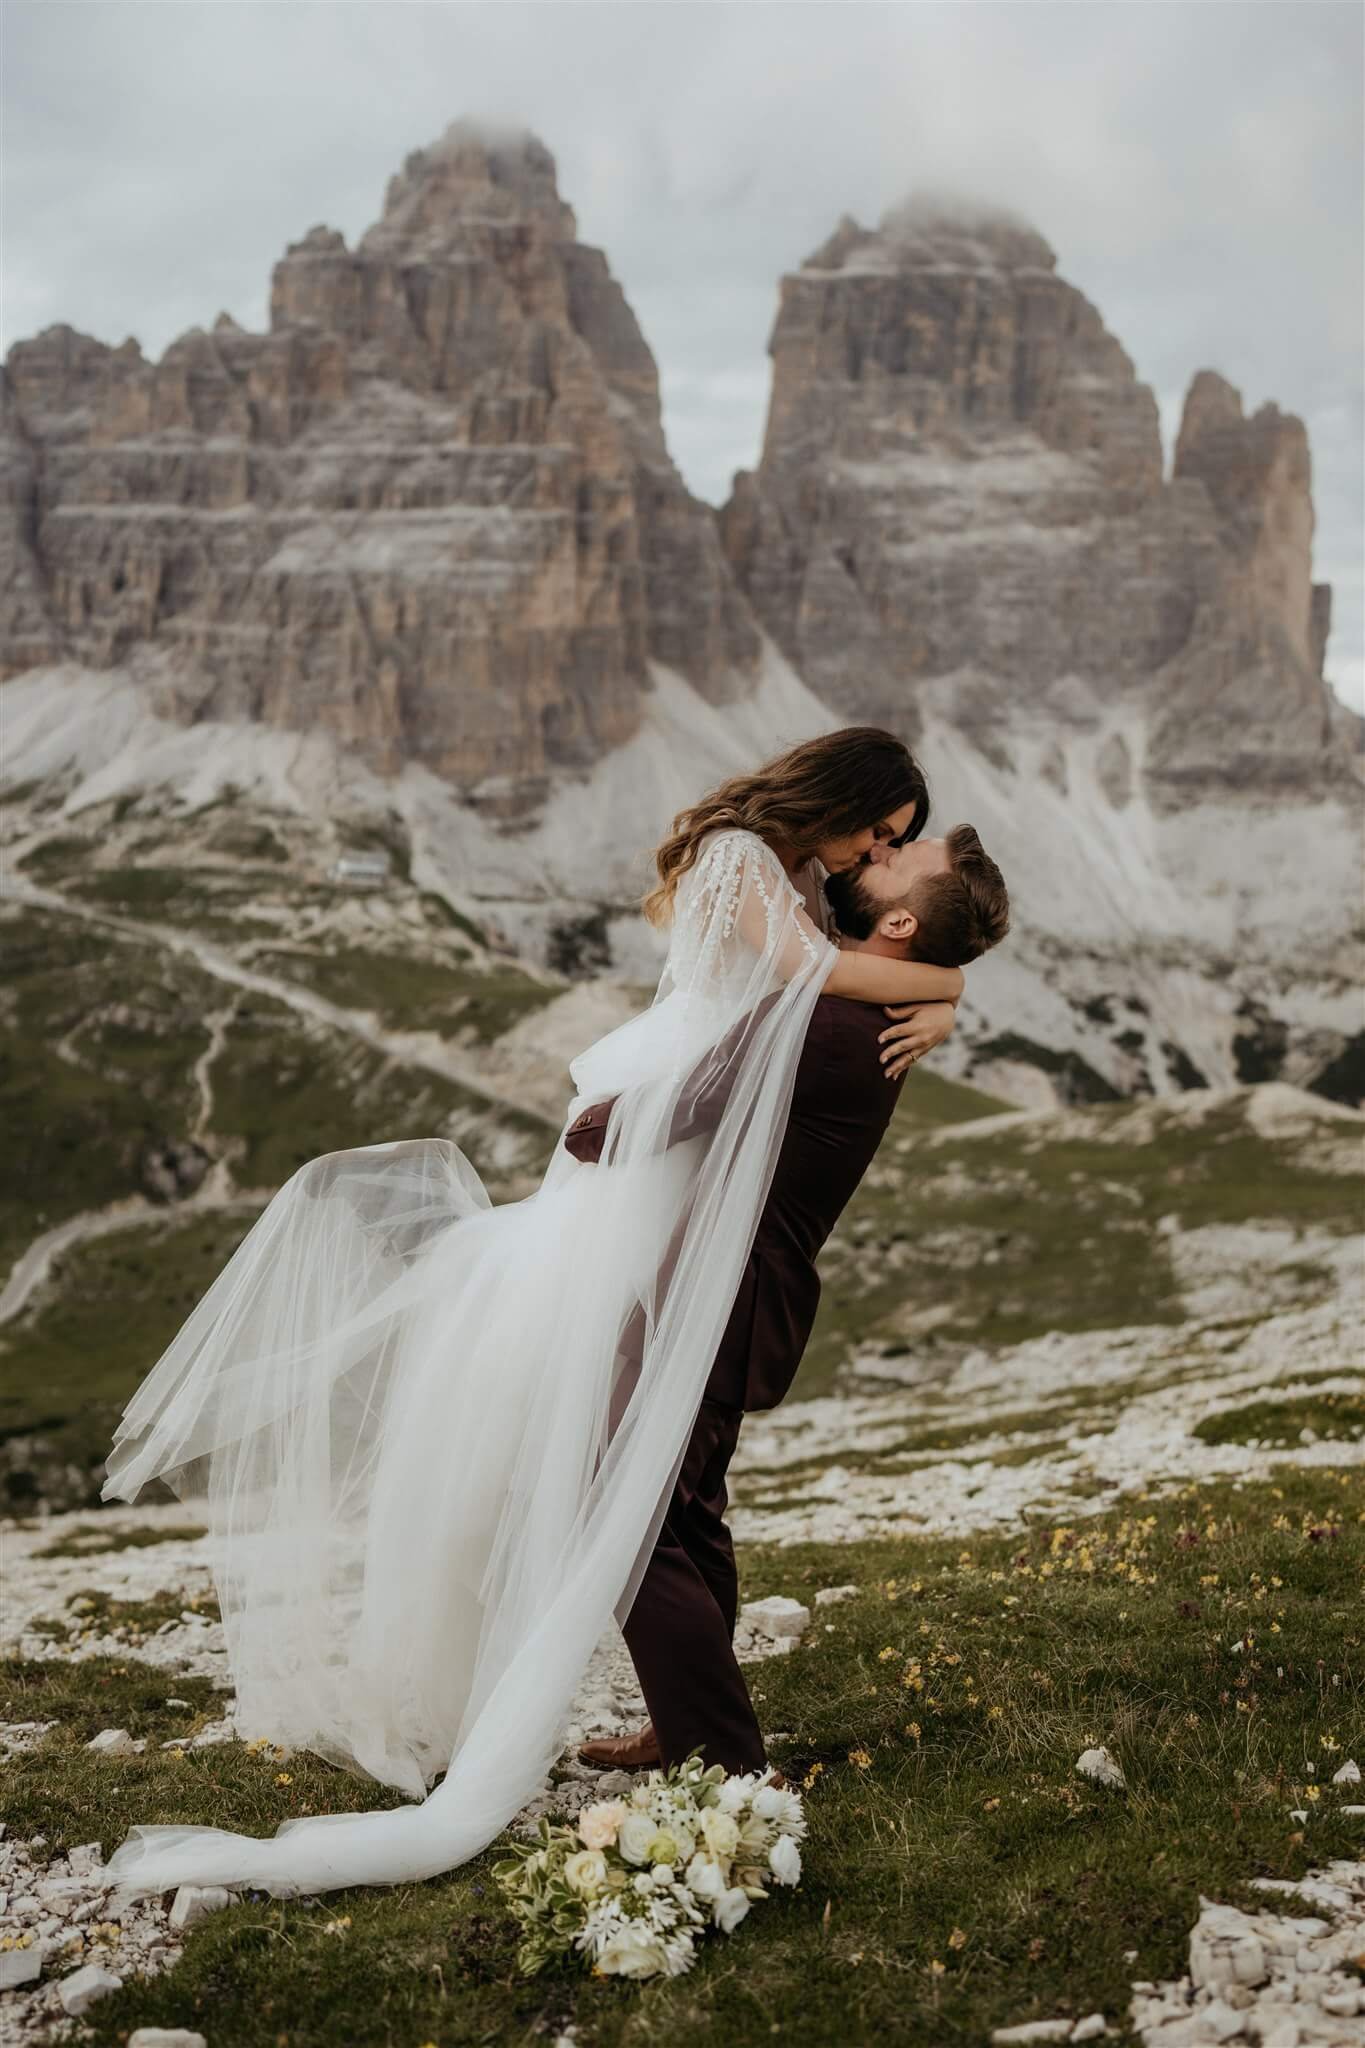 Bride and groom couple portraits in the Dolomites for their intimate vow renewal